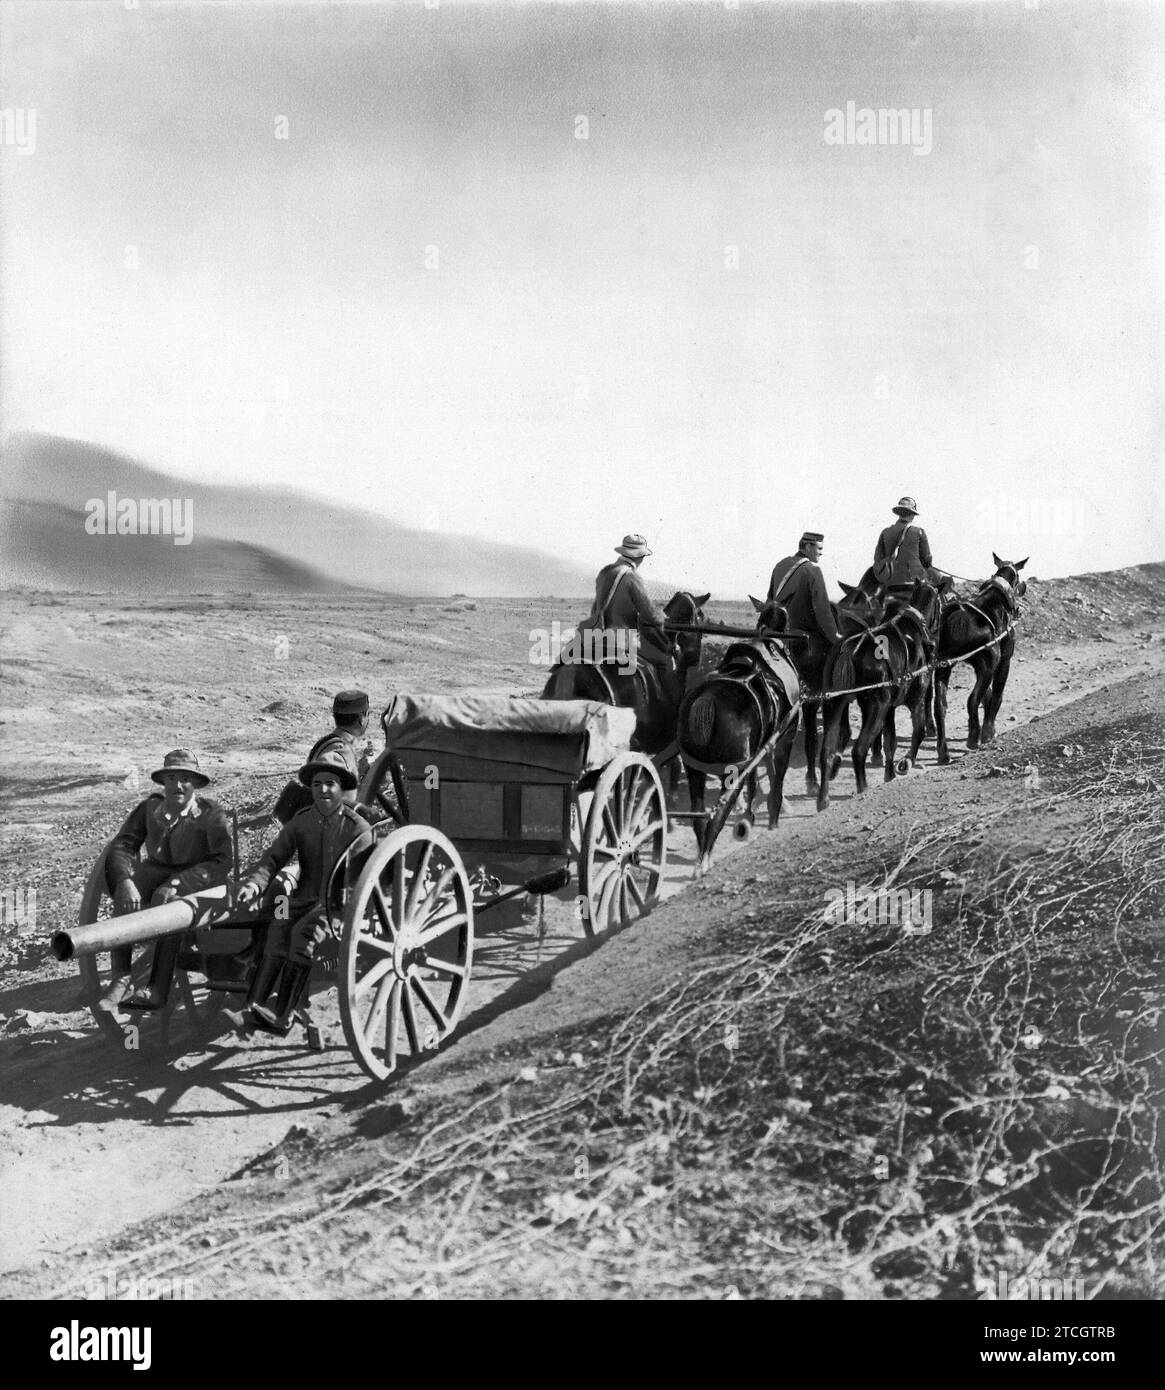 12/31/1921. Melilla. A recovered cannon. Abandoned by the Moors in their hasty escape from a cannon, he was picked up by soldiers of the Light group, under the orders of Captain Marquis of Someruelos (X). Credit: Album / Archivo ABC / Lázaro Stock Photo